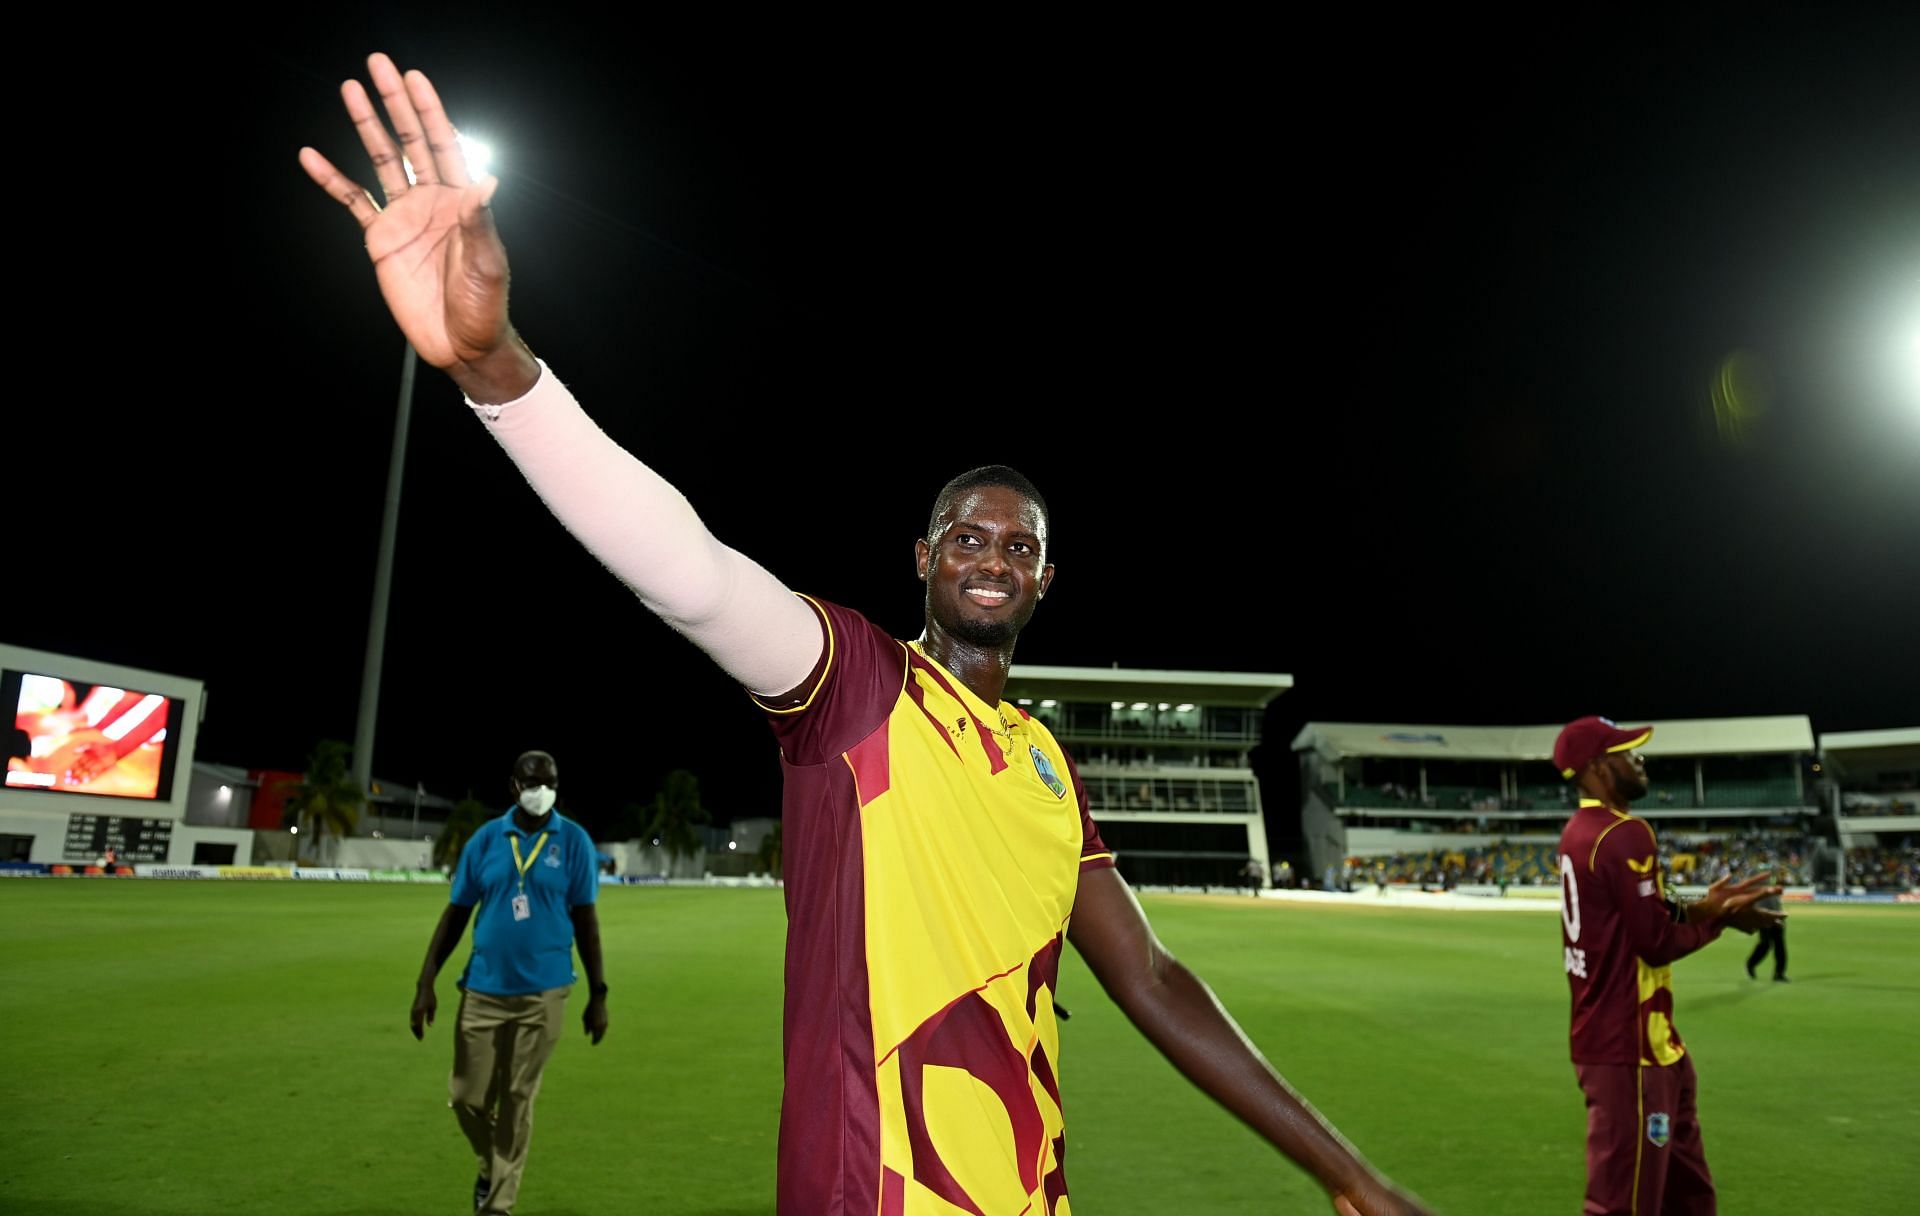 Jason Holder&#039;s performance will be important for West Indies